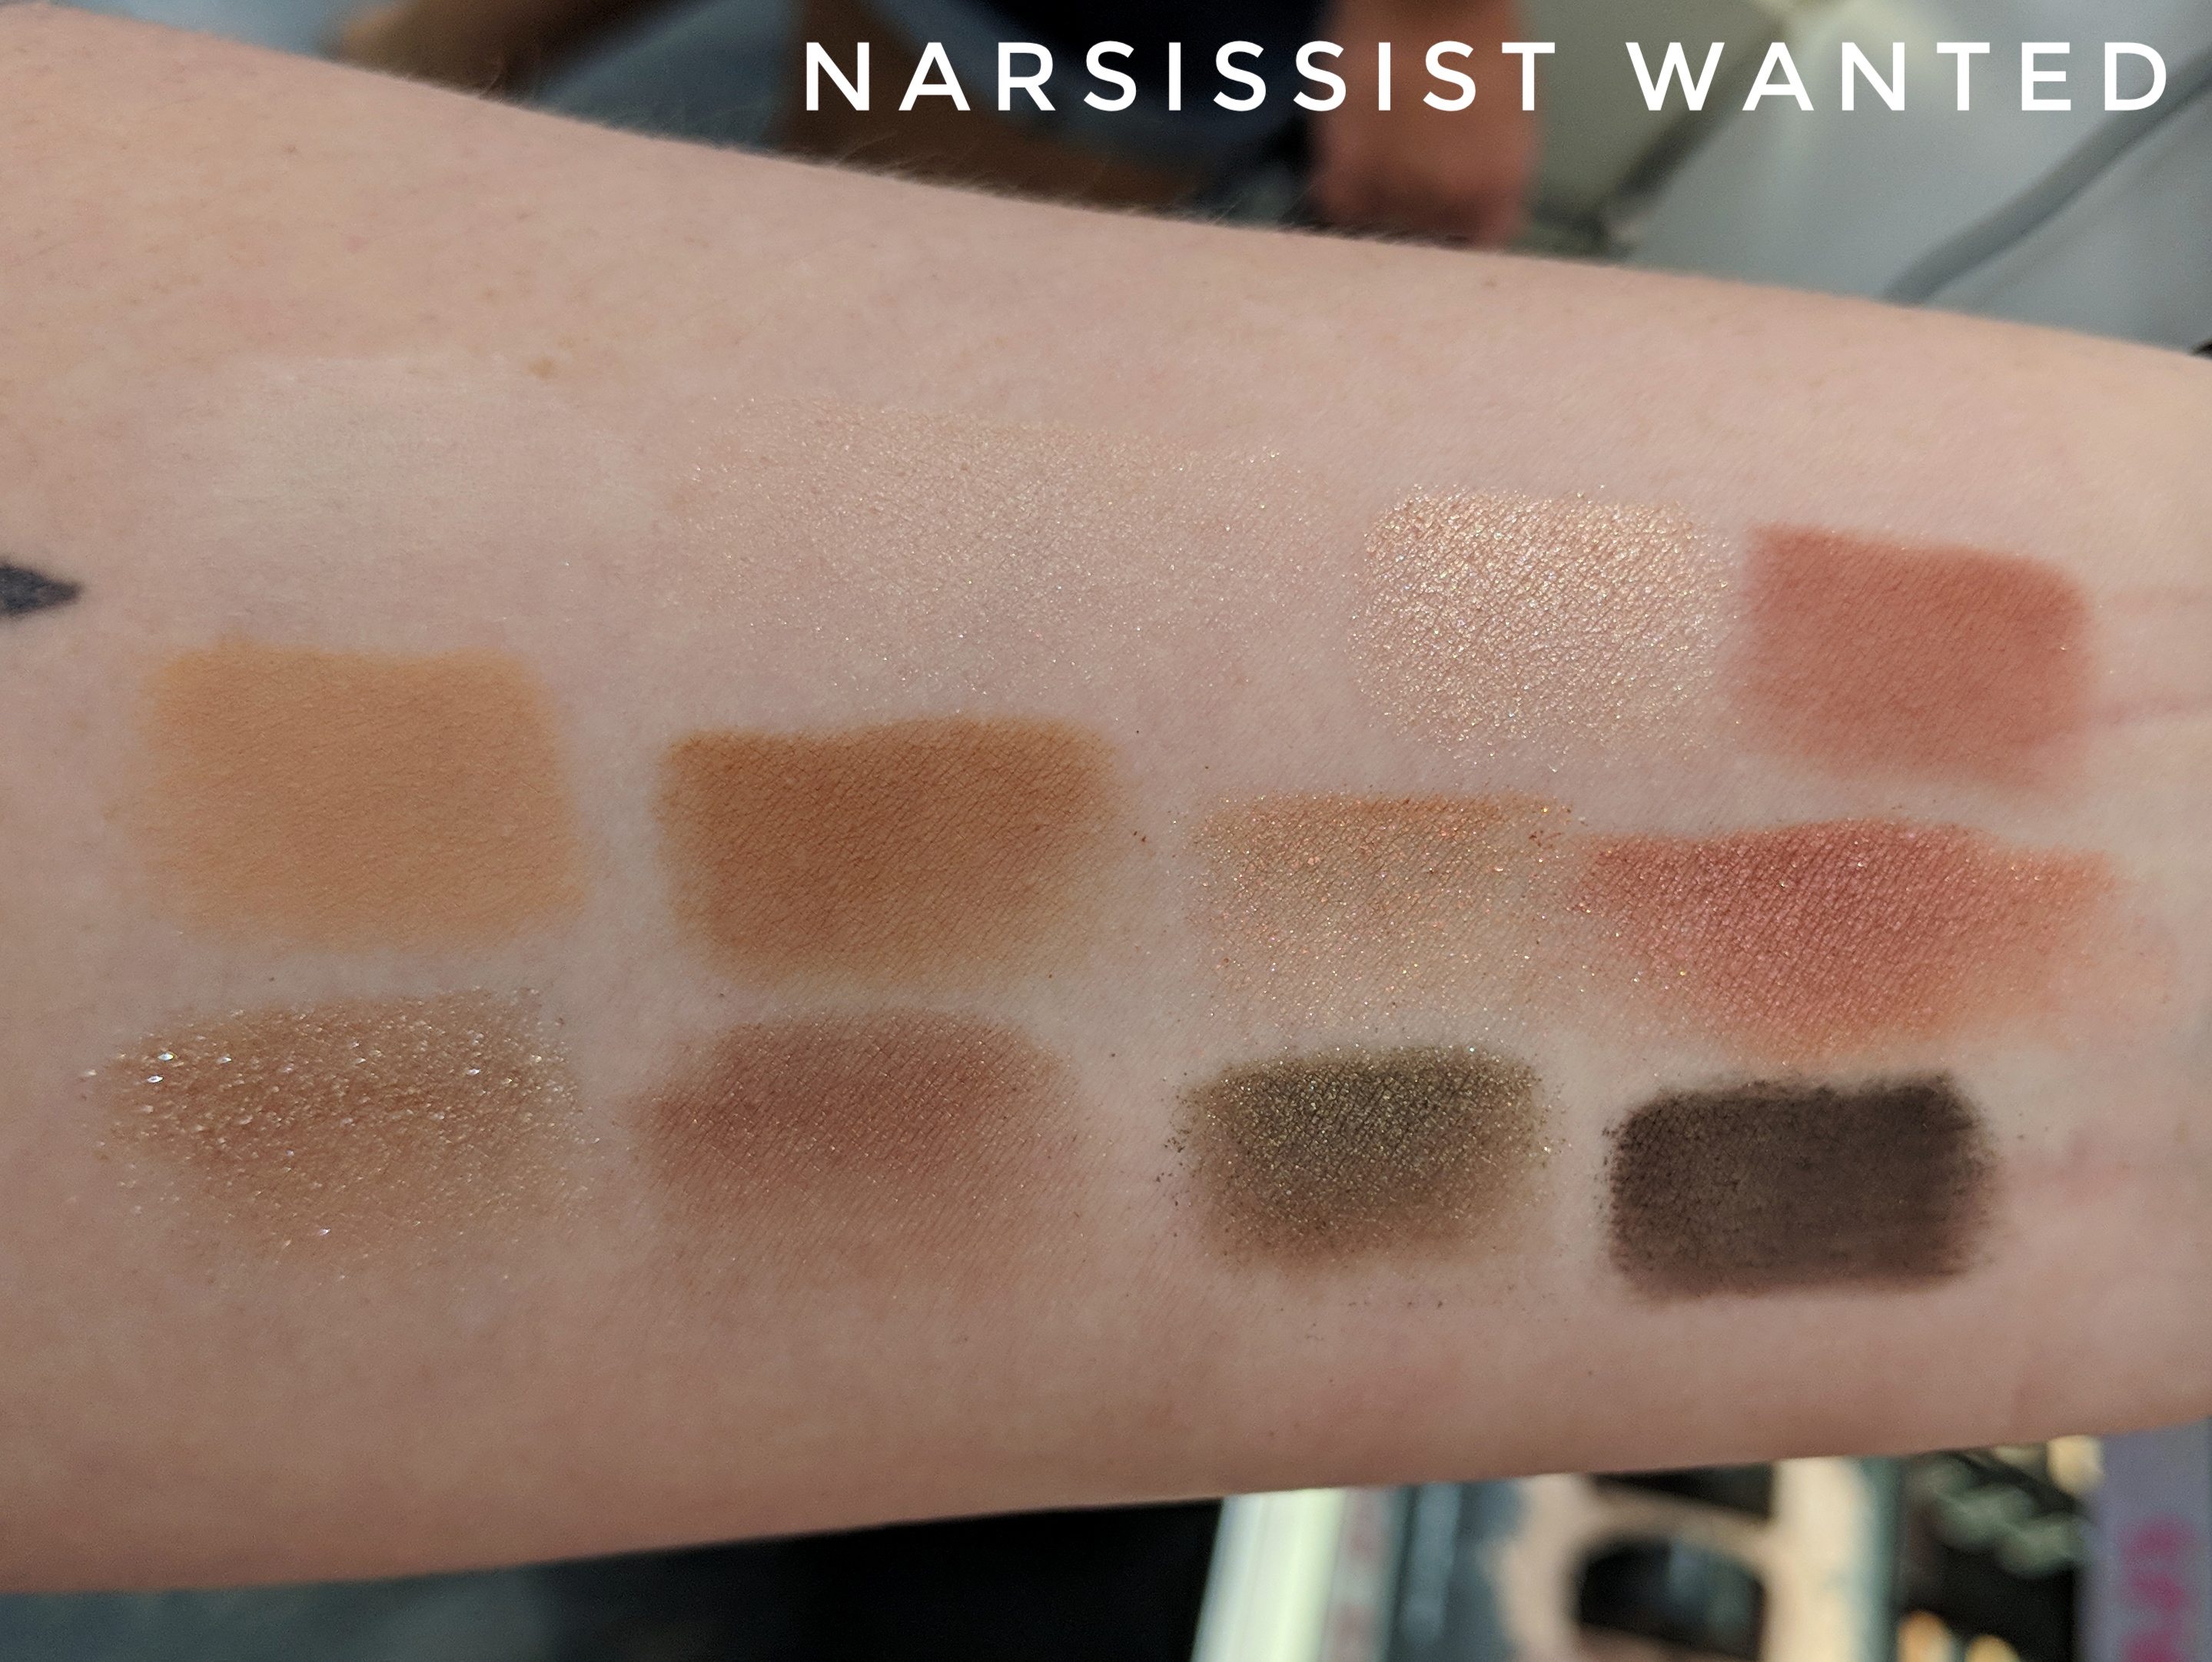 NARS NARSissist Wanted Eyeshadow Palette Swatches